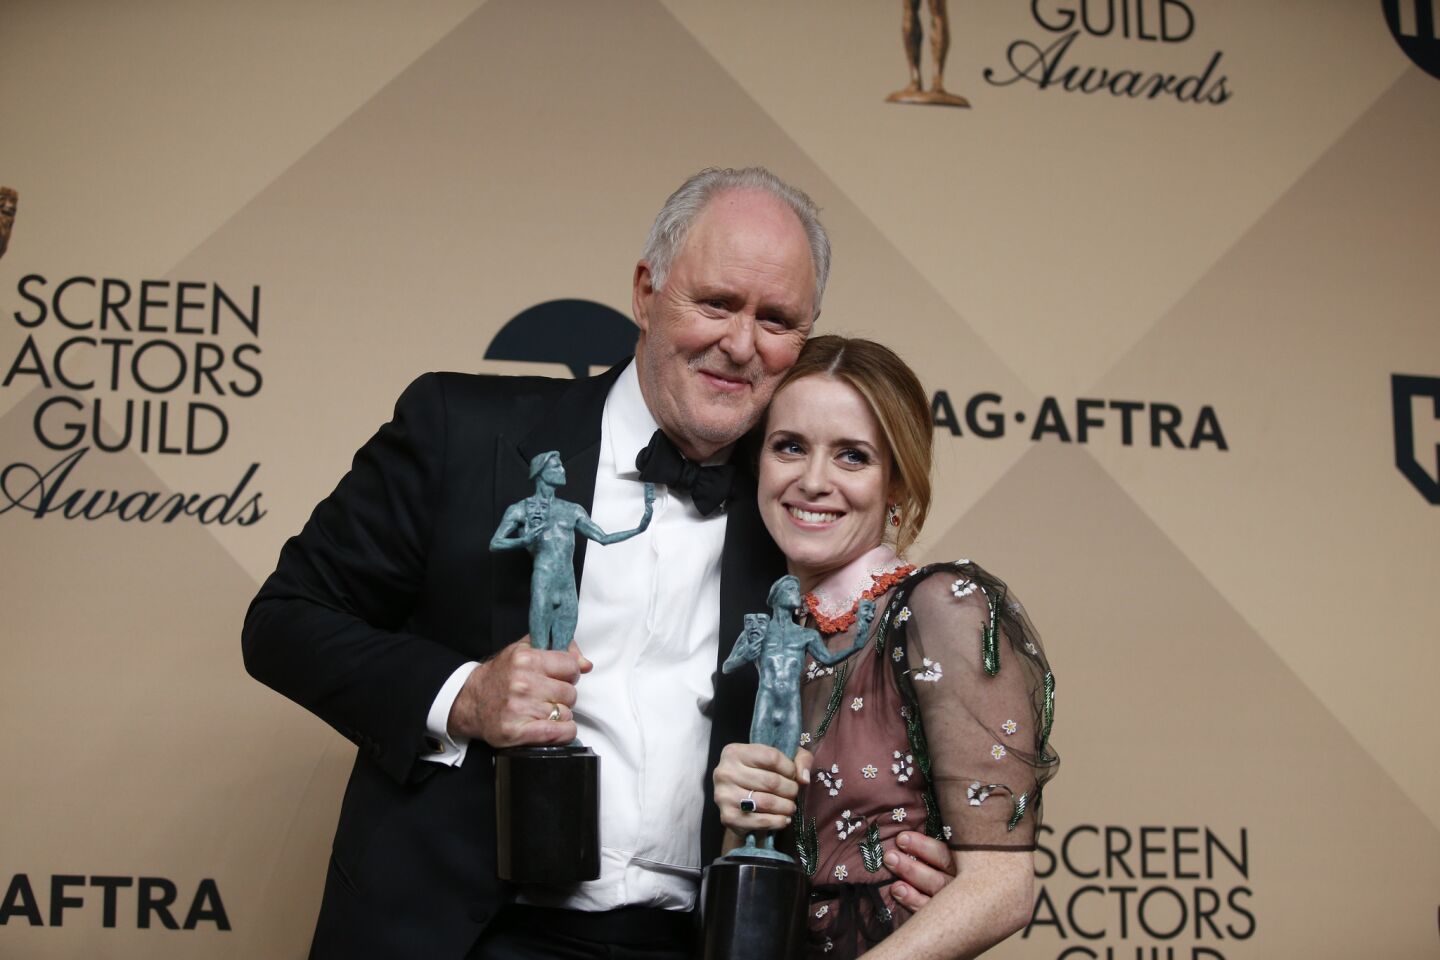 "The Crown's" John Lithgow, winner for male actor in a drama series, with co-star Claire Foy, winner for female actor in a drama series.